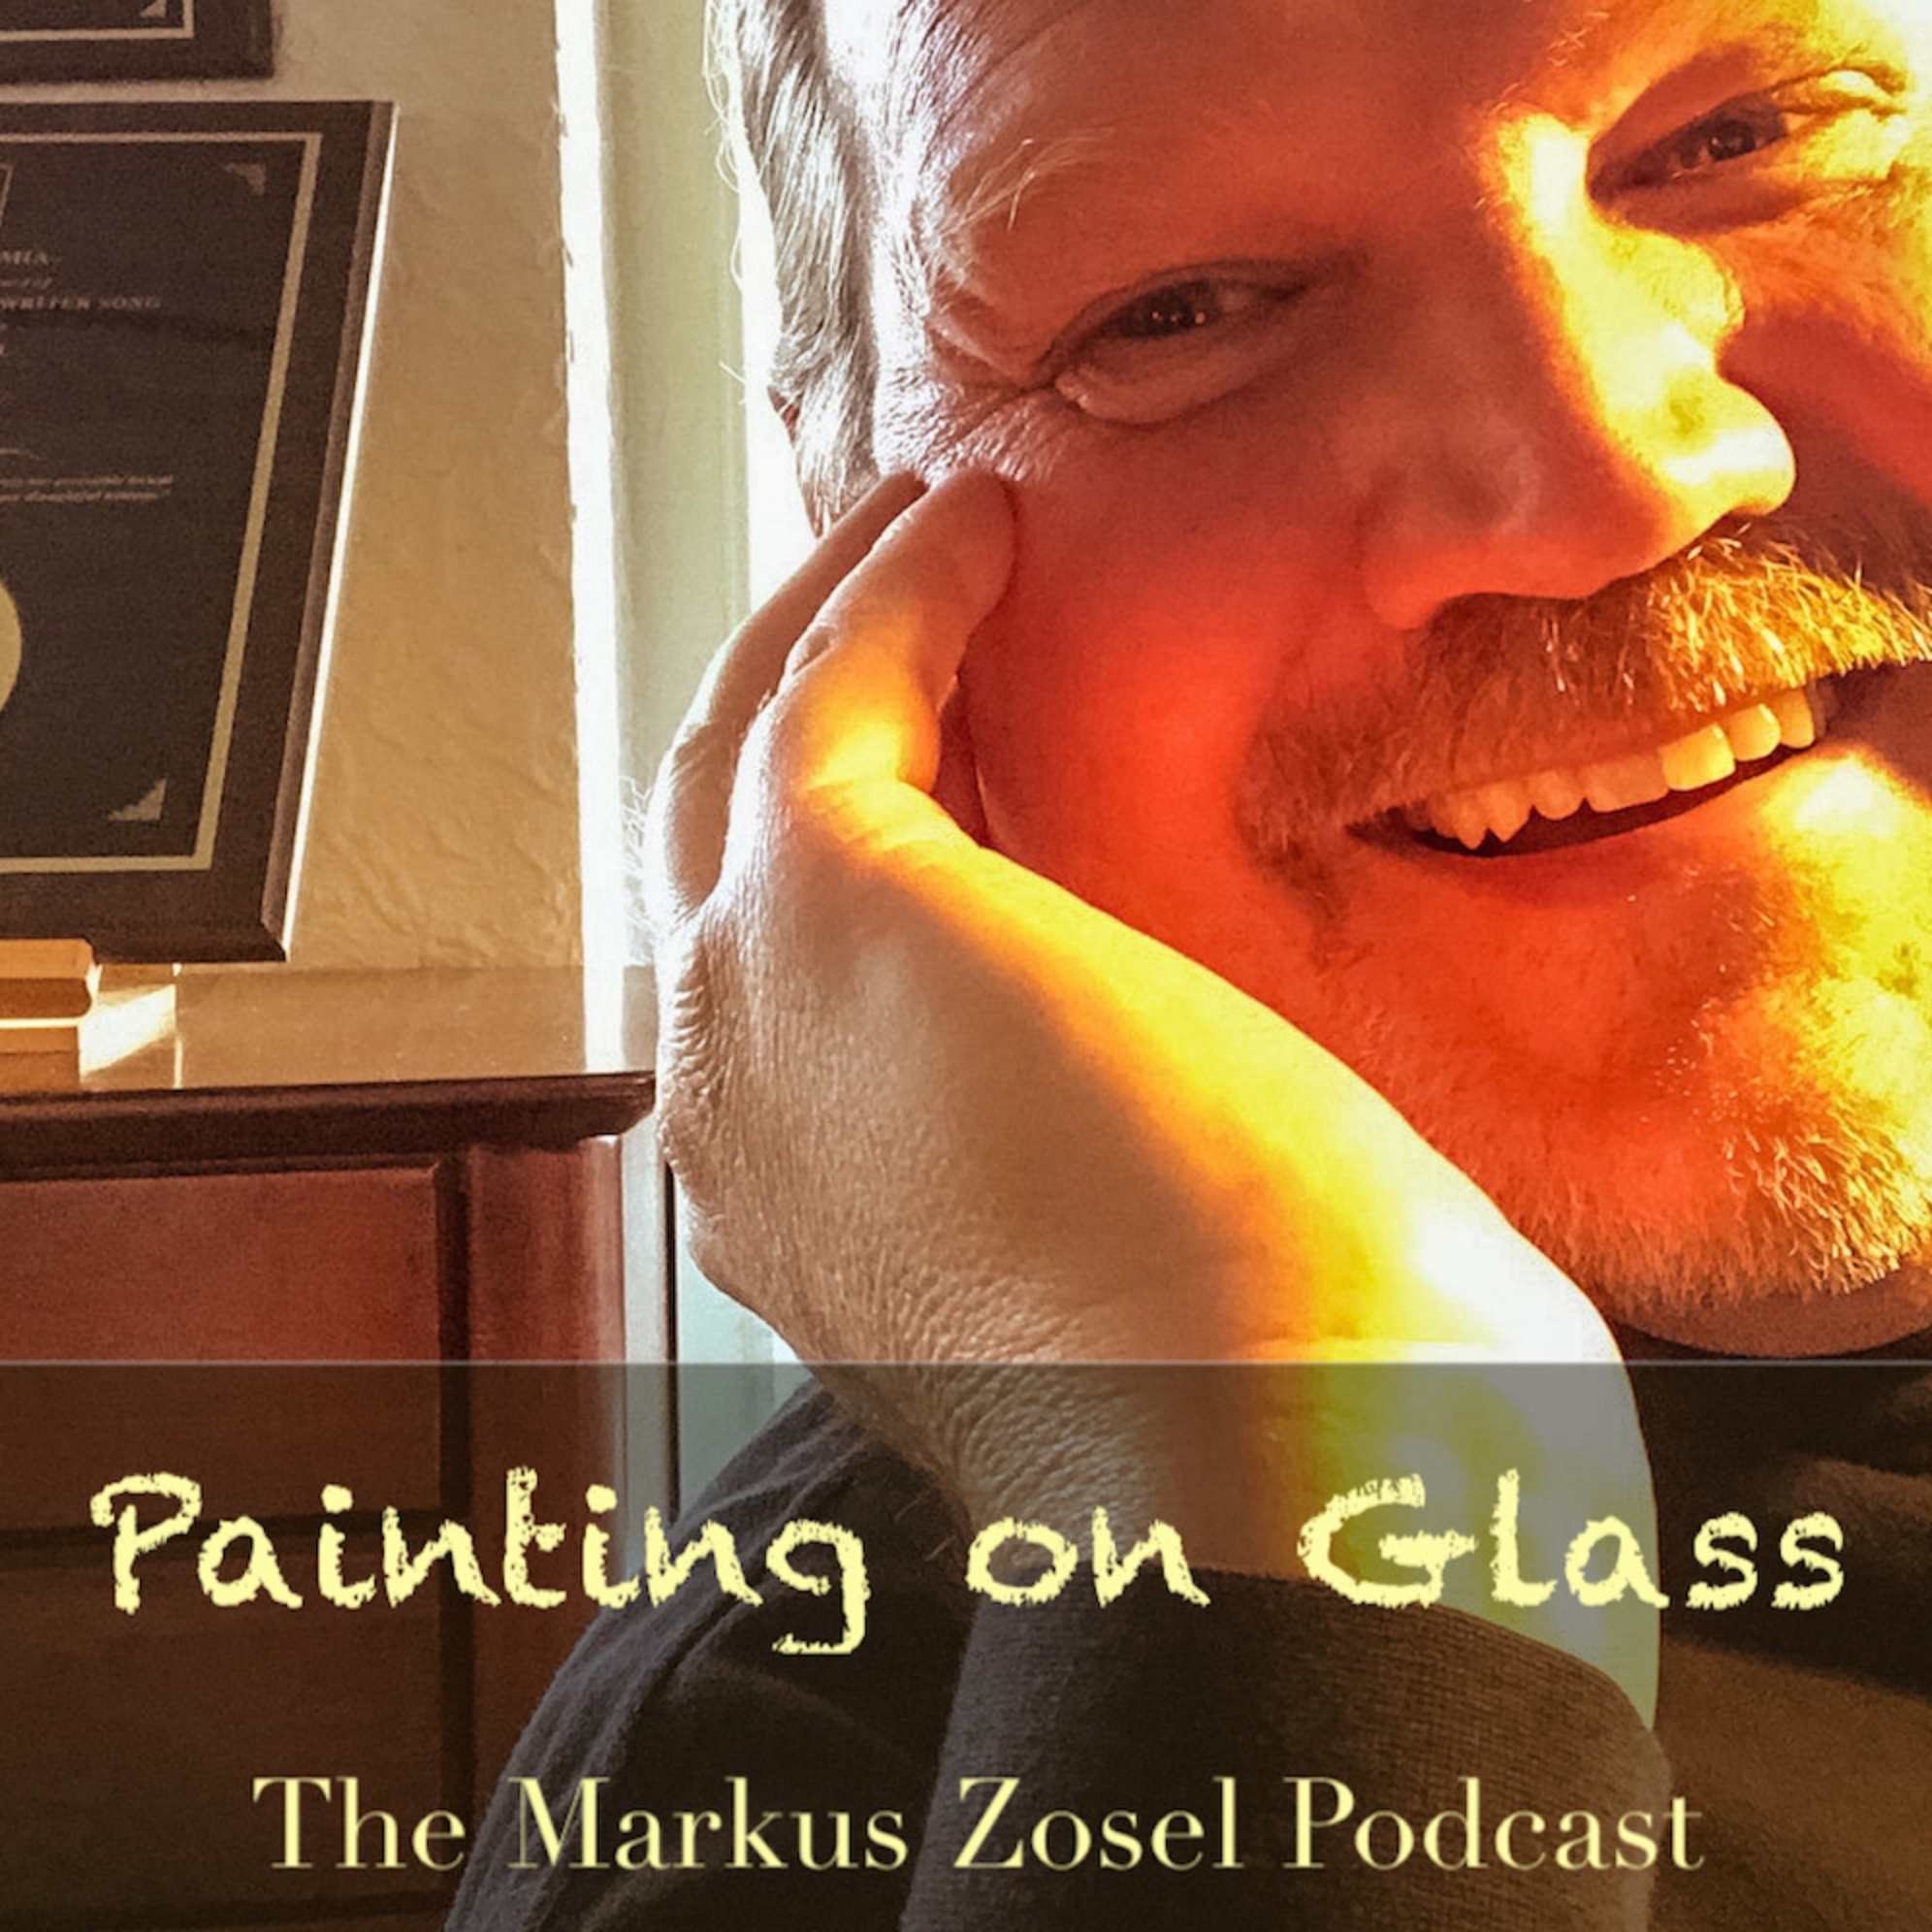 Markus Zosel‘s ”Painting on Glass” - The Markus Zosel Podcast